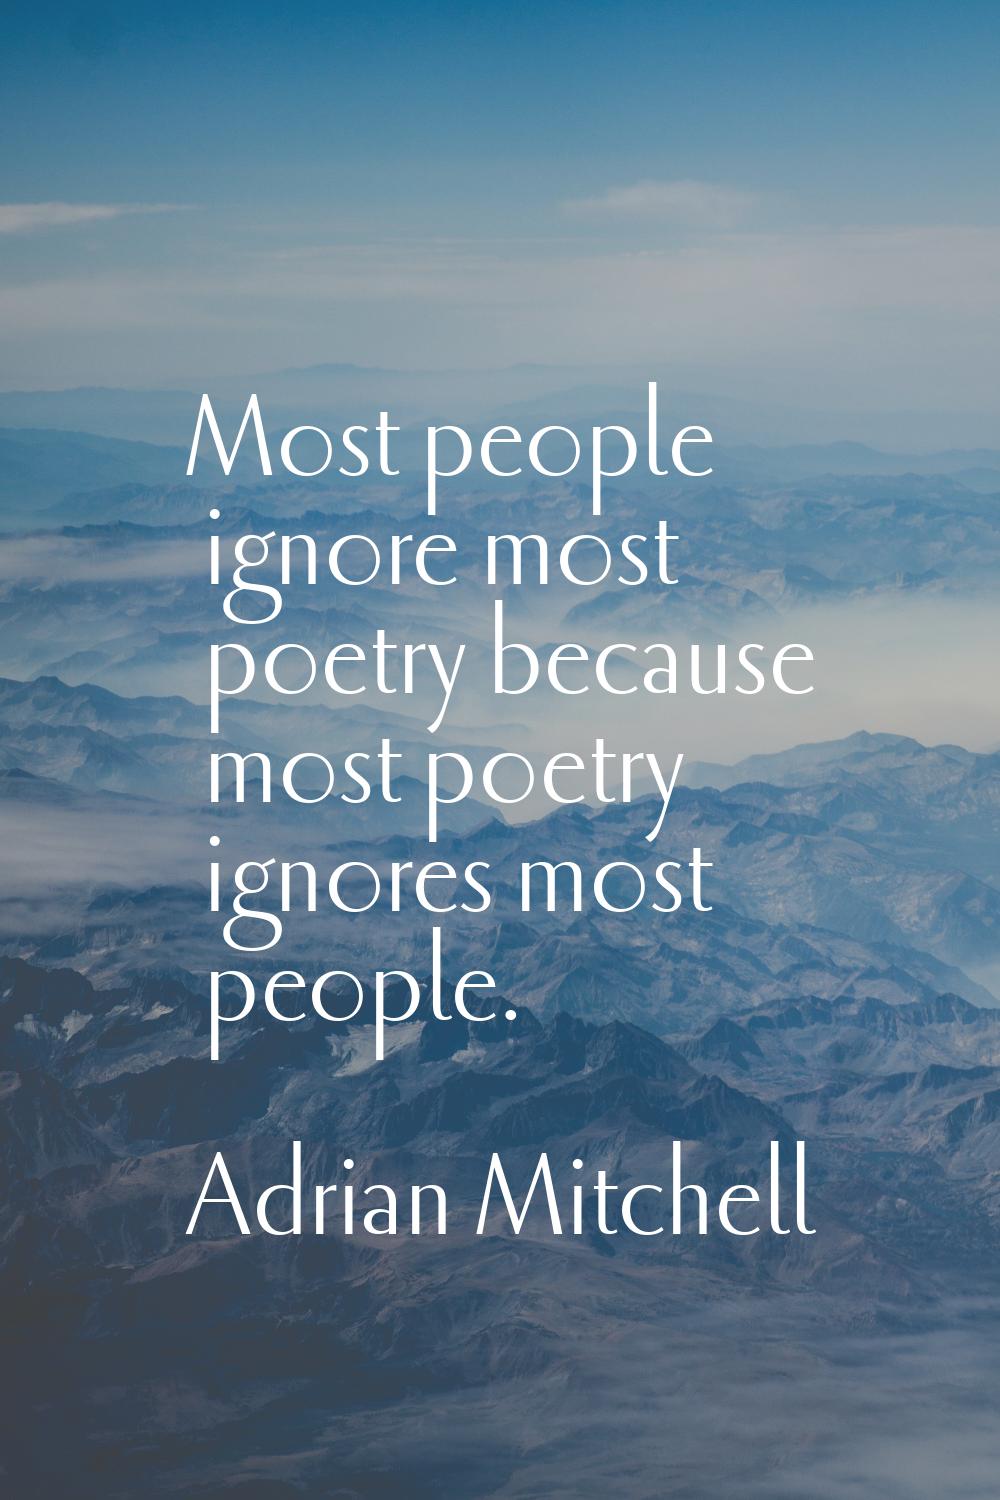 Most people ignore most poetry because most poetry ignores most people.